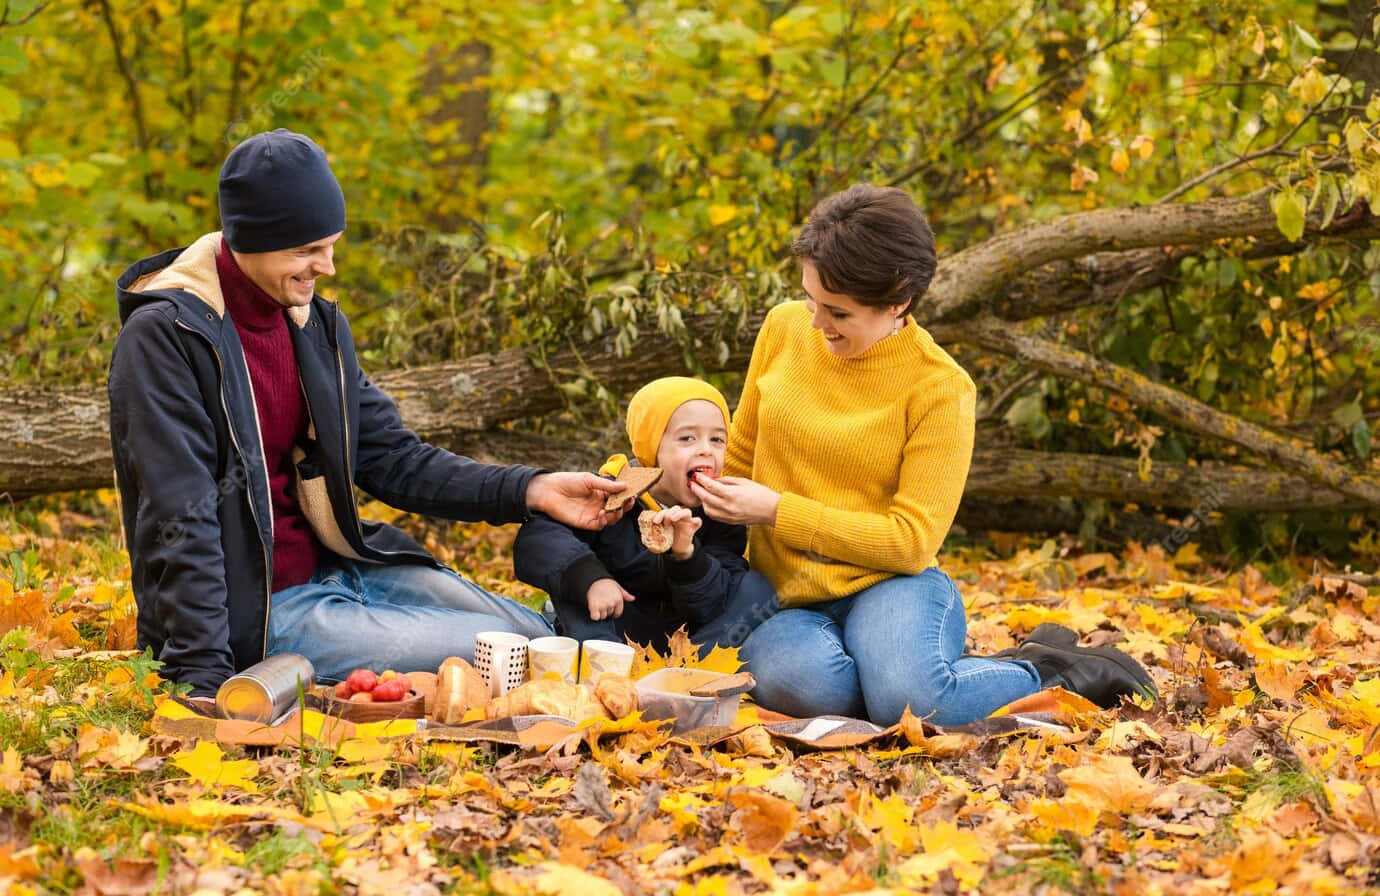 Family Having A Picnic In The Autumn